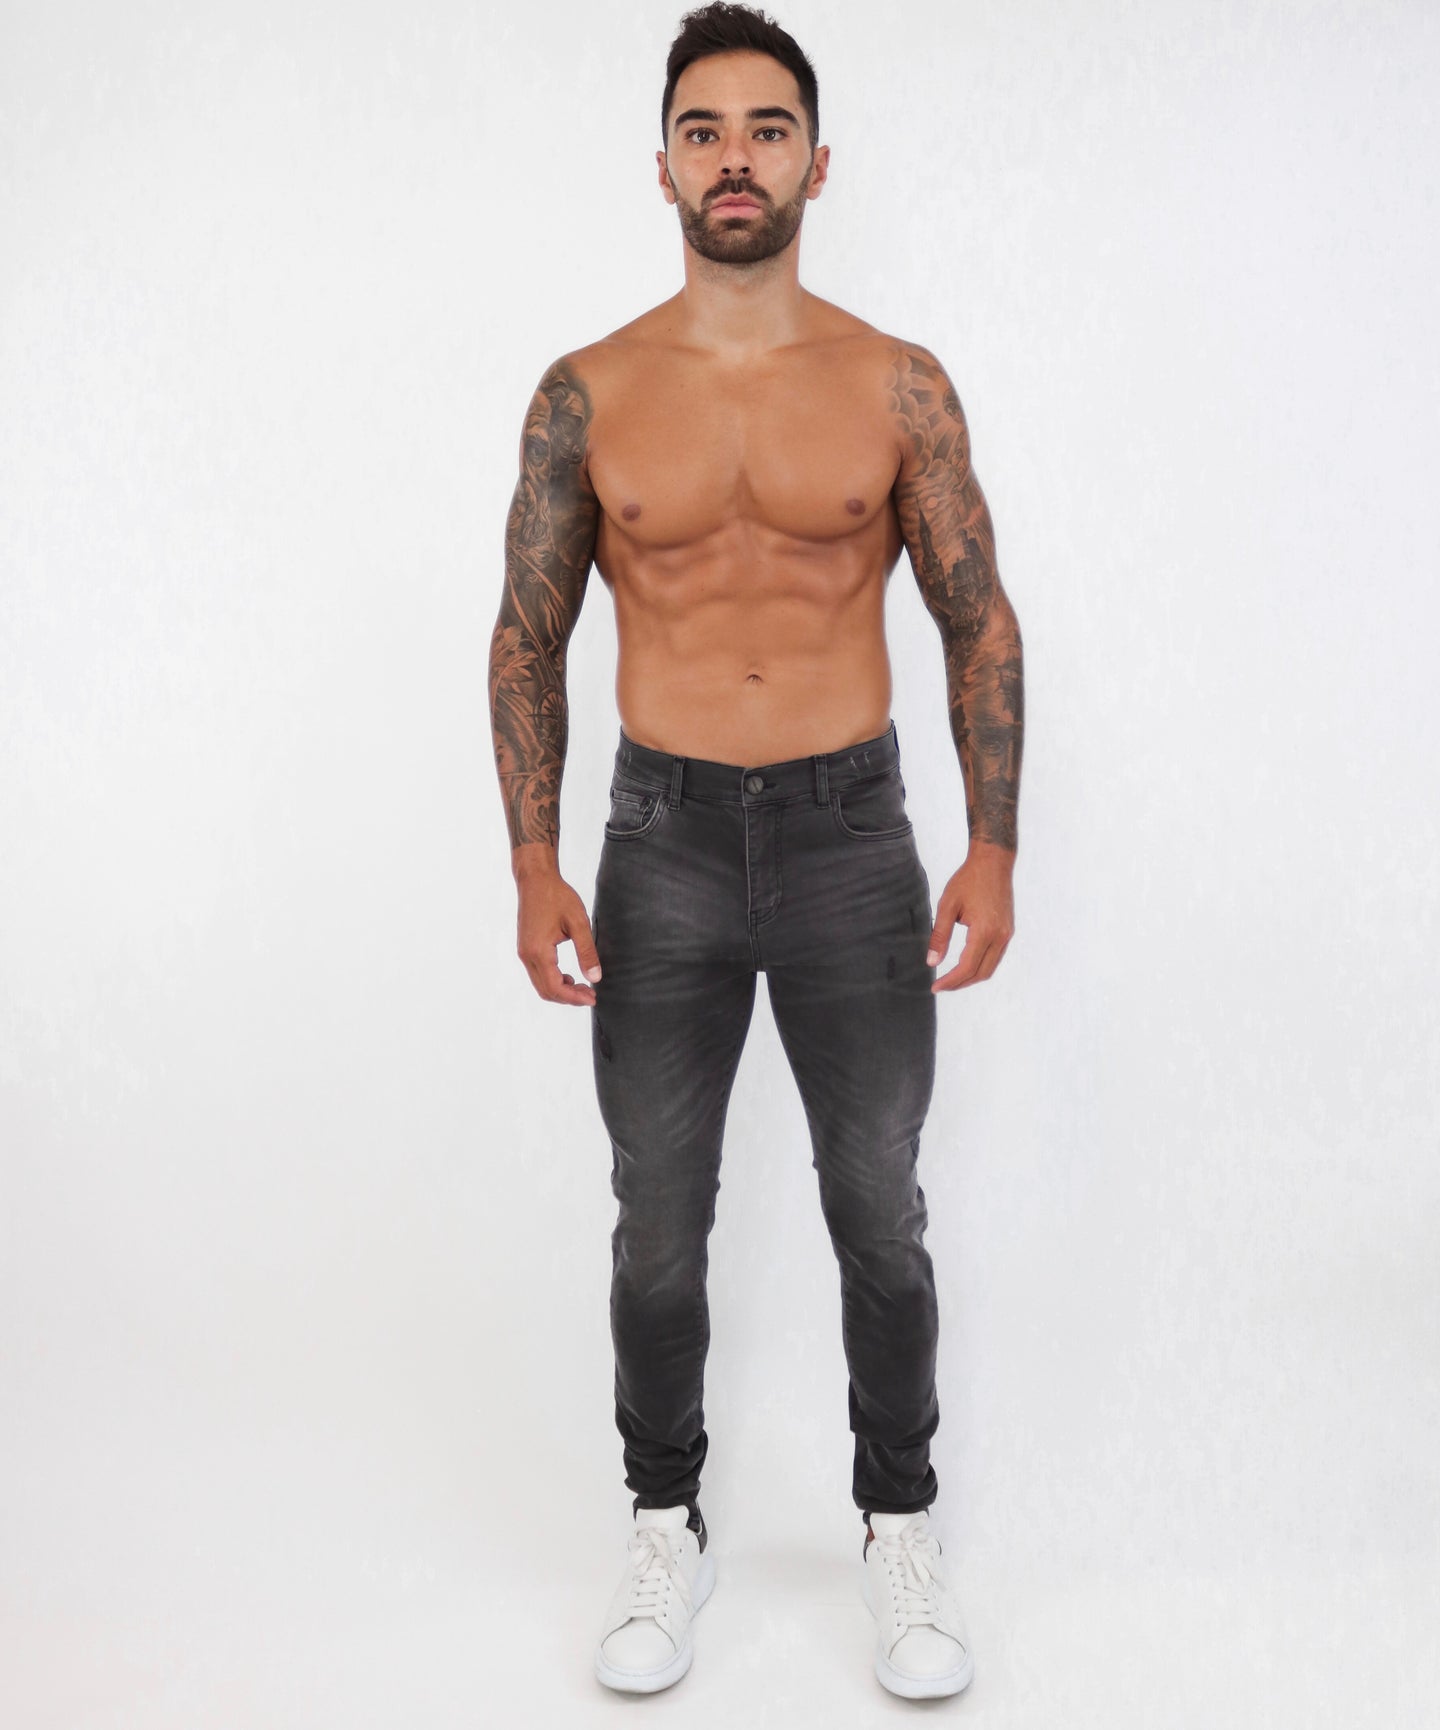 Grey Skinny Jeans Small Repaired